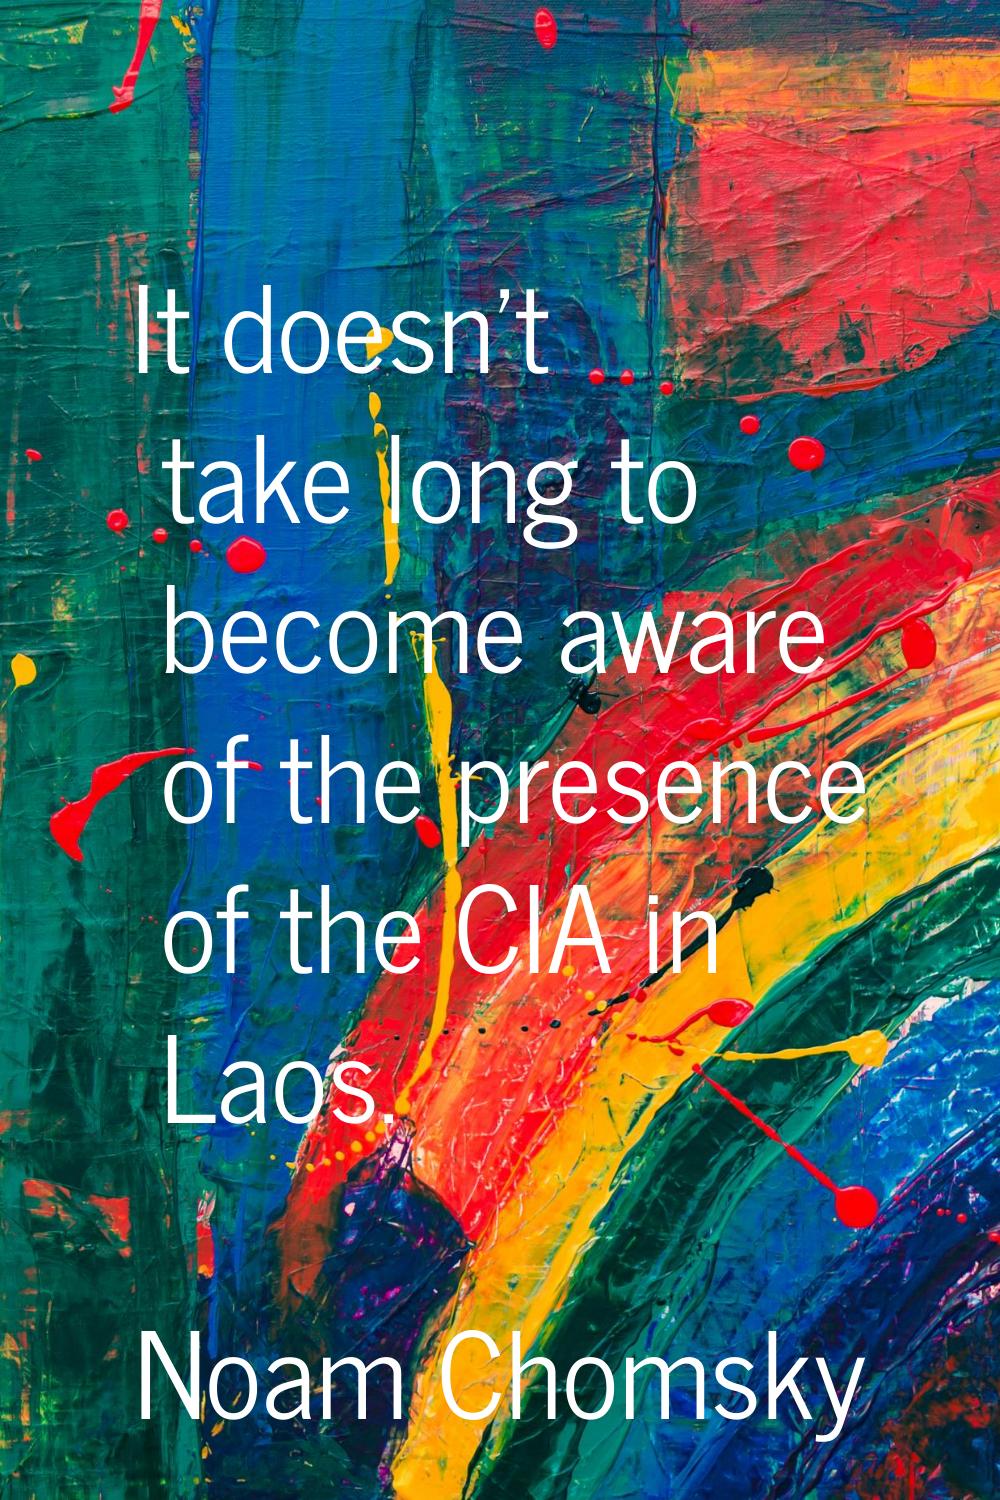 It doesn't take long to become aware of the presence of the CIA in Laos.